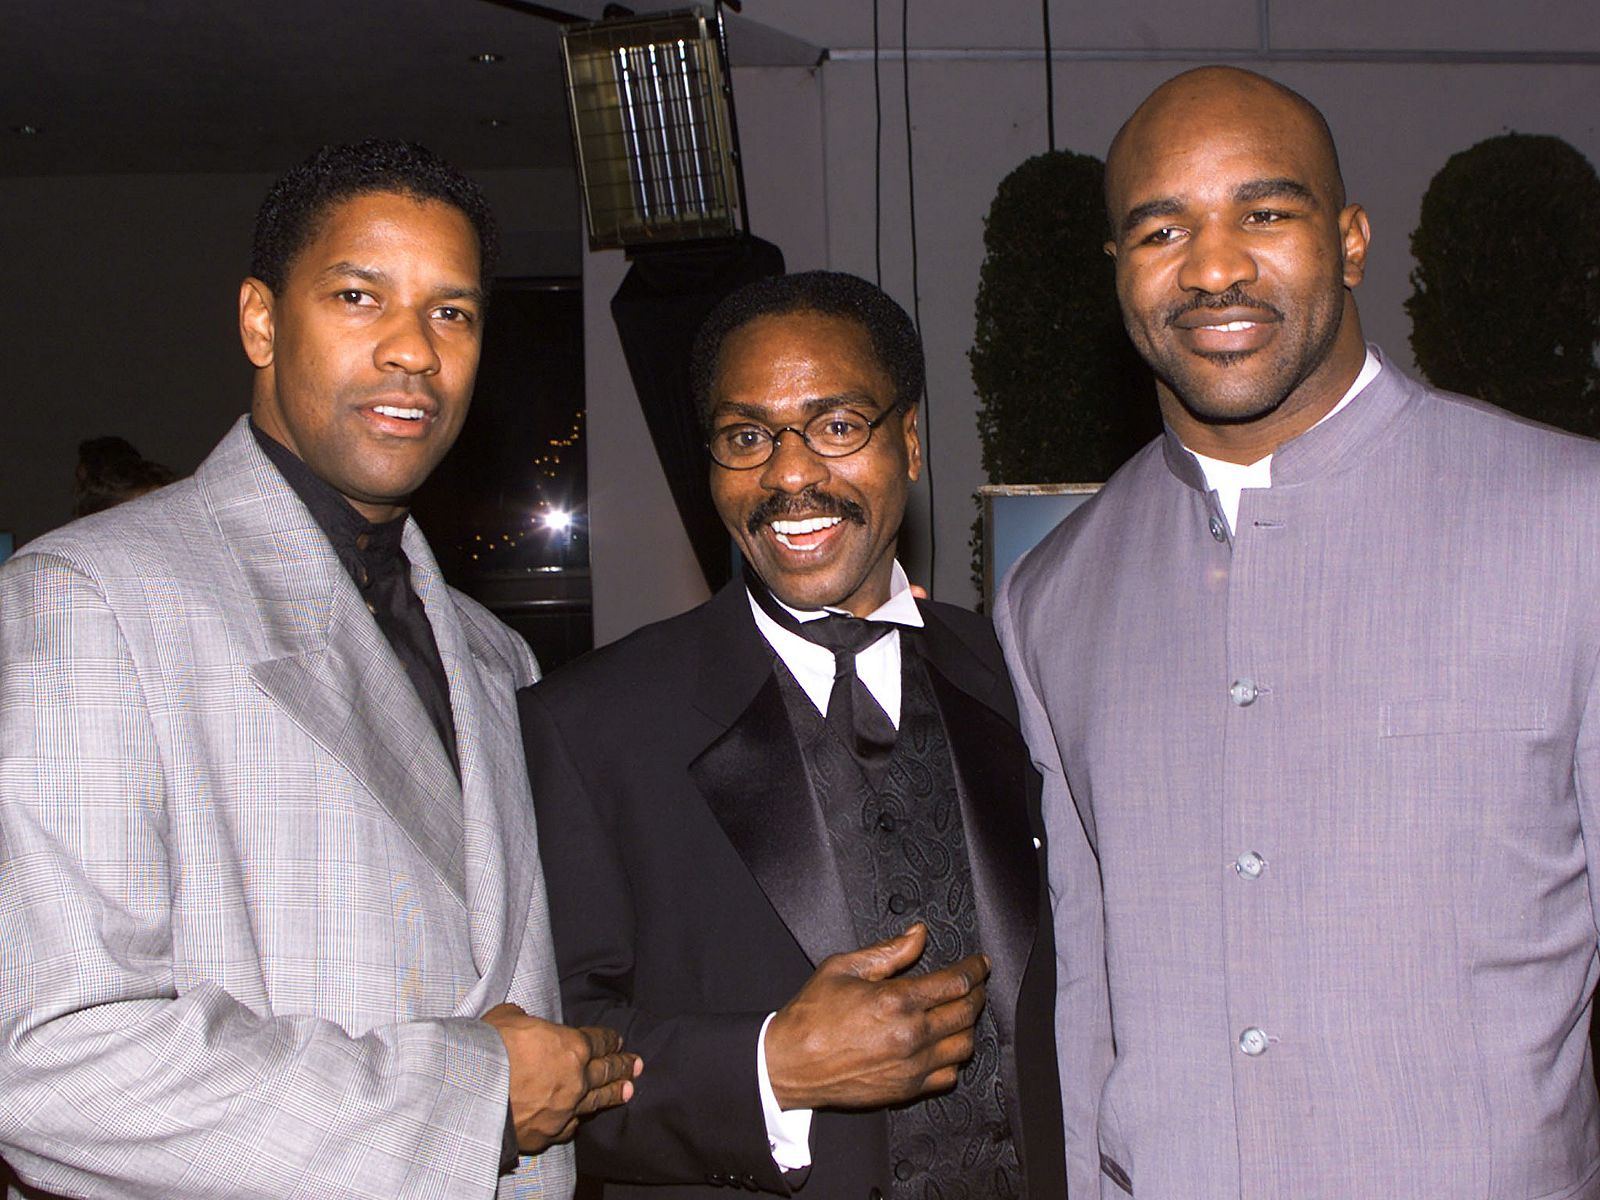 File photo of Rubin Carter posing with Washington and Holyfield at premiere of The Hurricane in Los Angeles